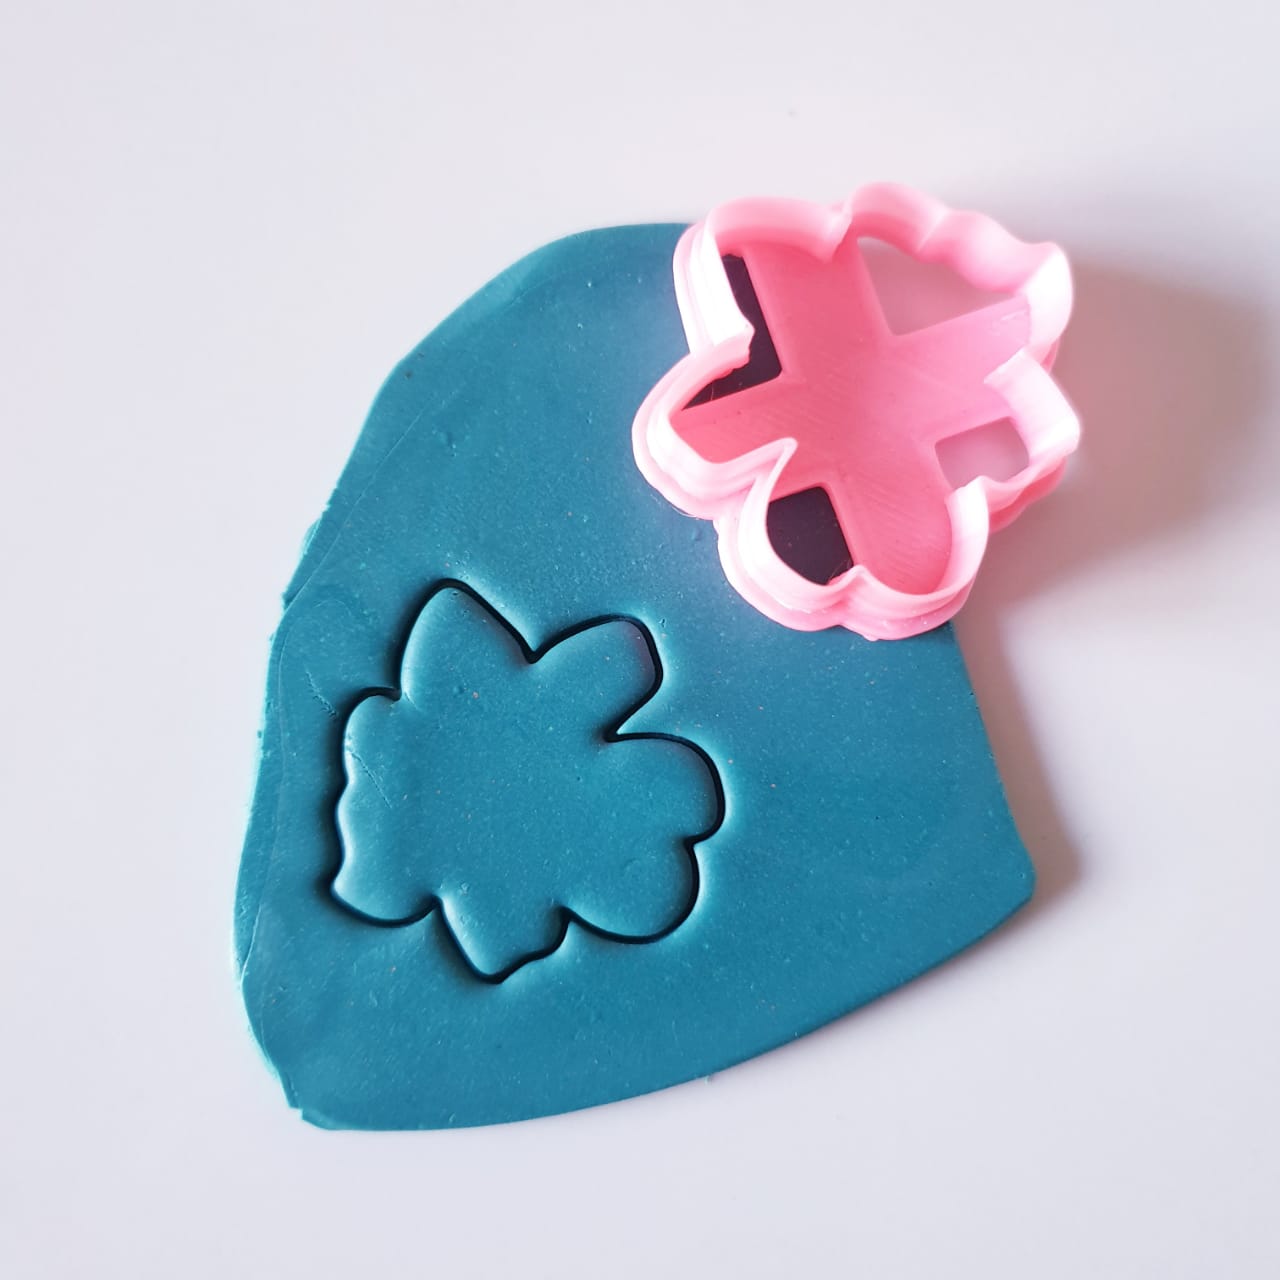 ABSTRACT FLOWER - POLYMER CLAY CUTTERS